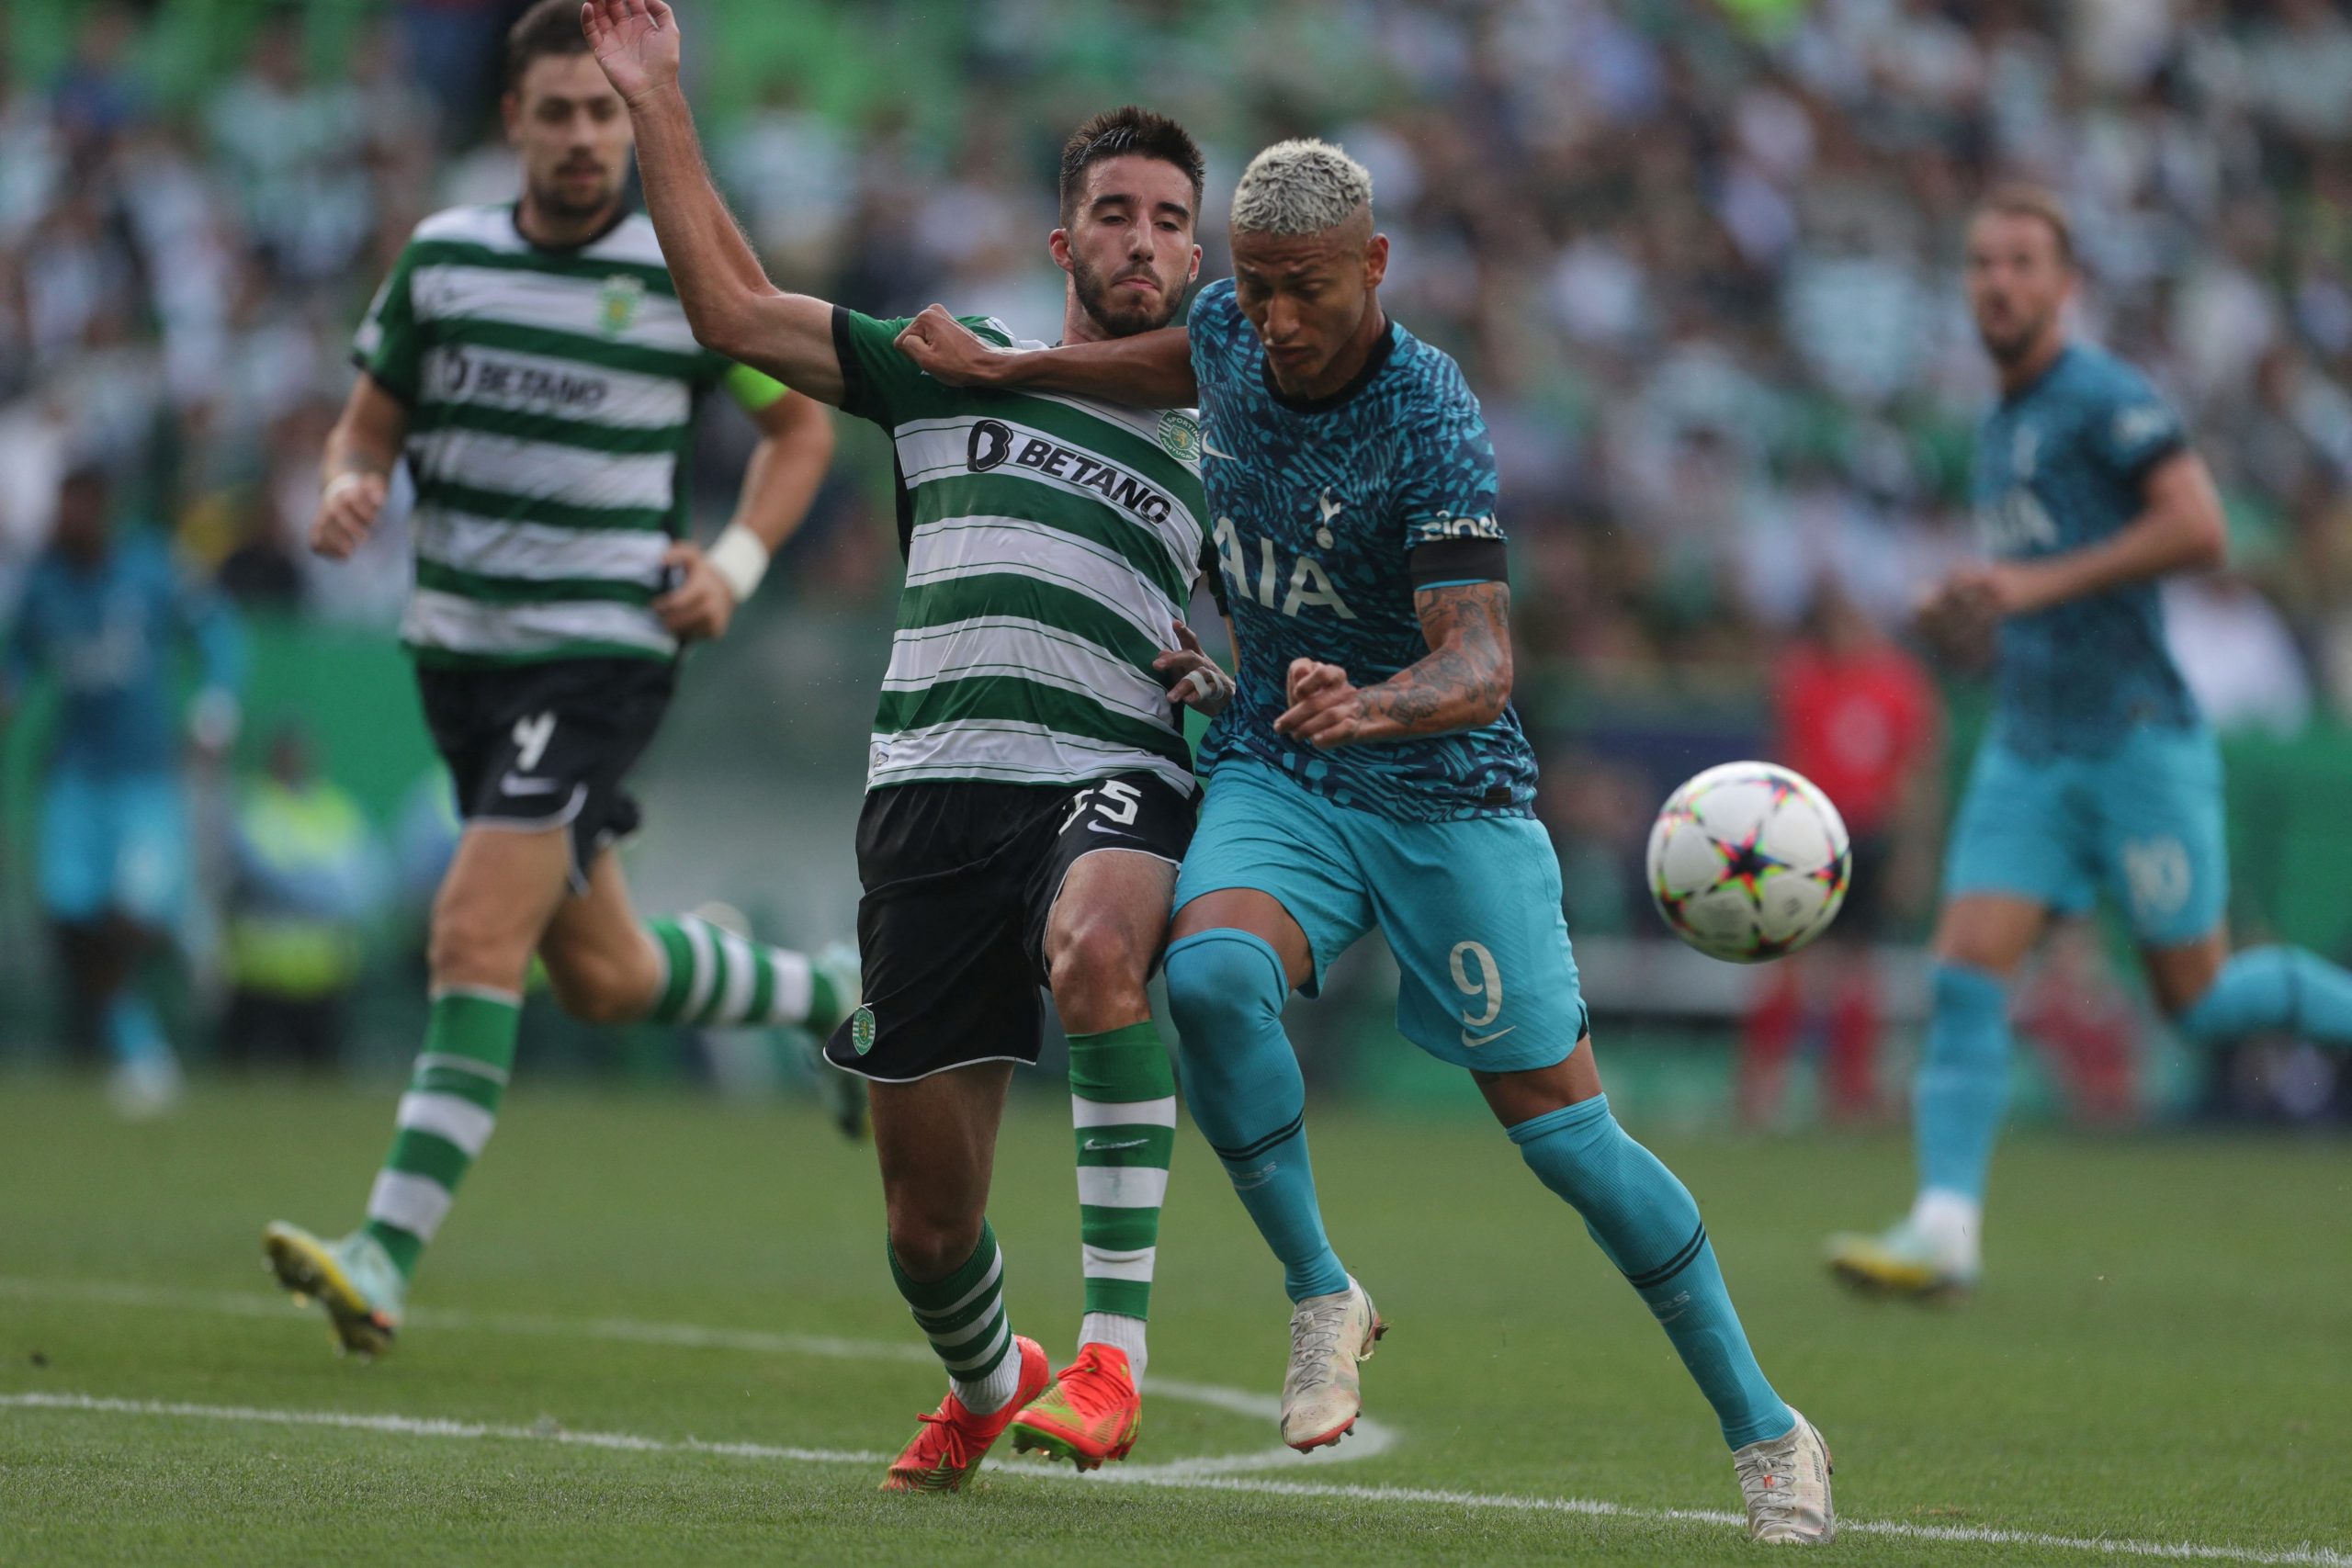 Sporting Lisbon's Manuel Ugarte fights for the ball with Tottenham Hotspur's Richarlison.